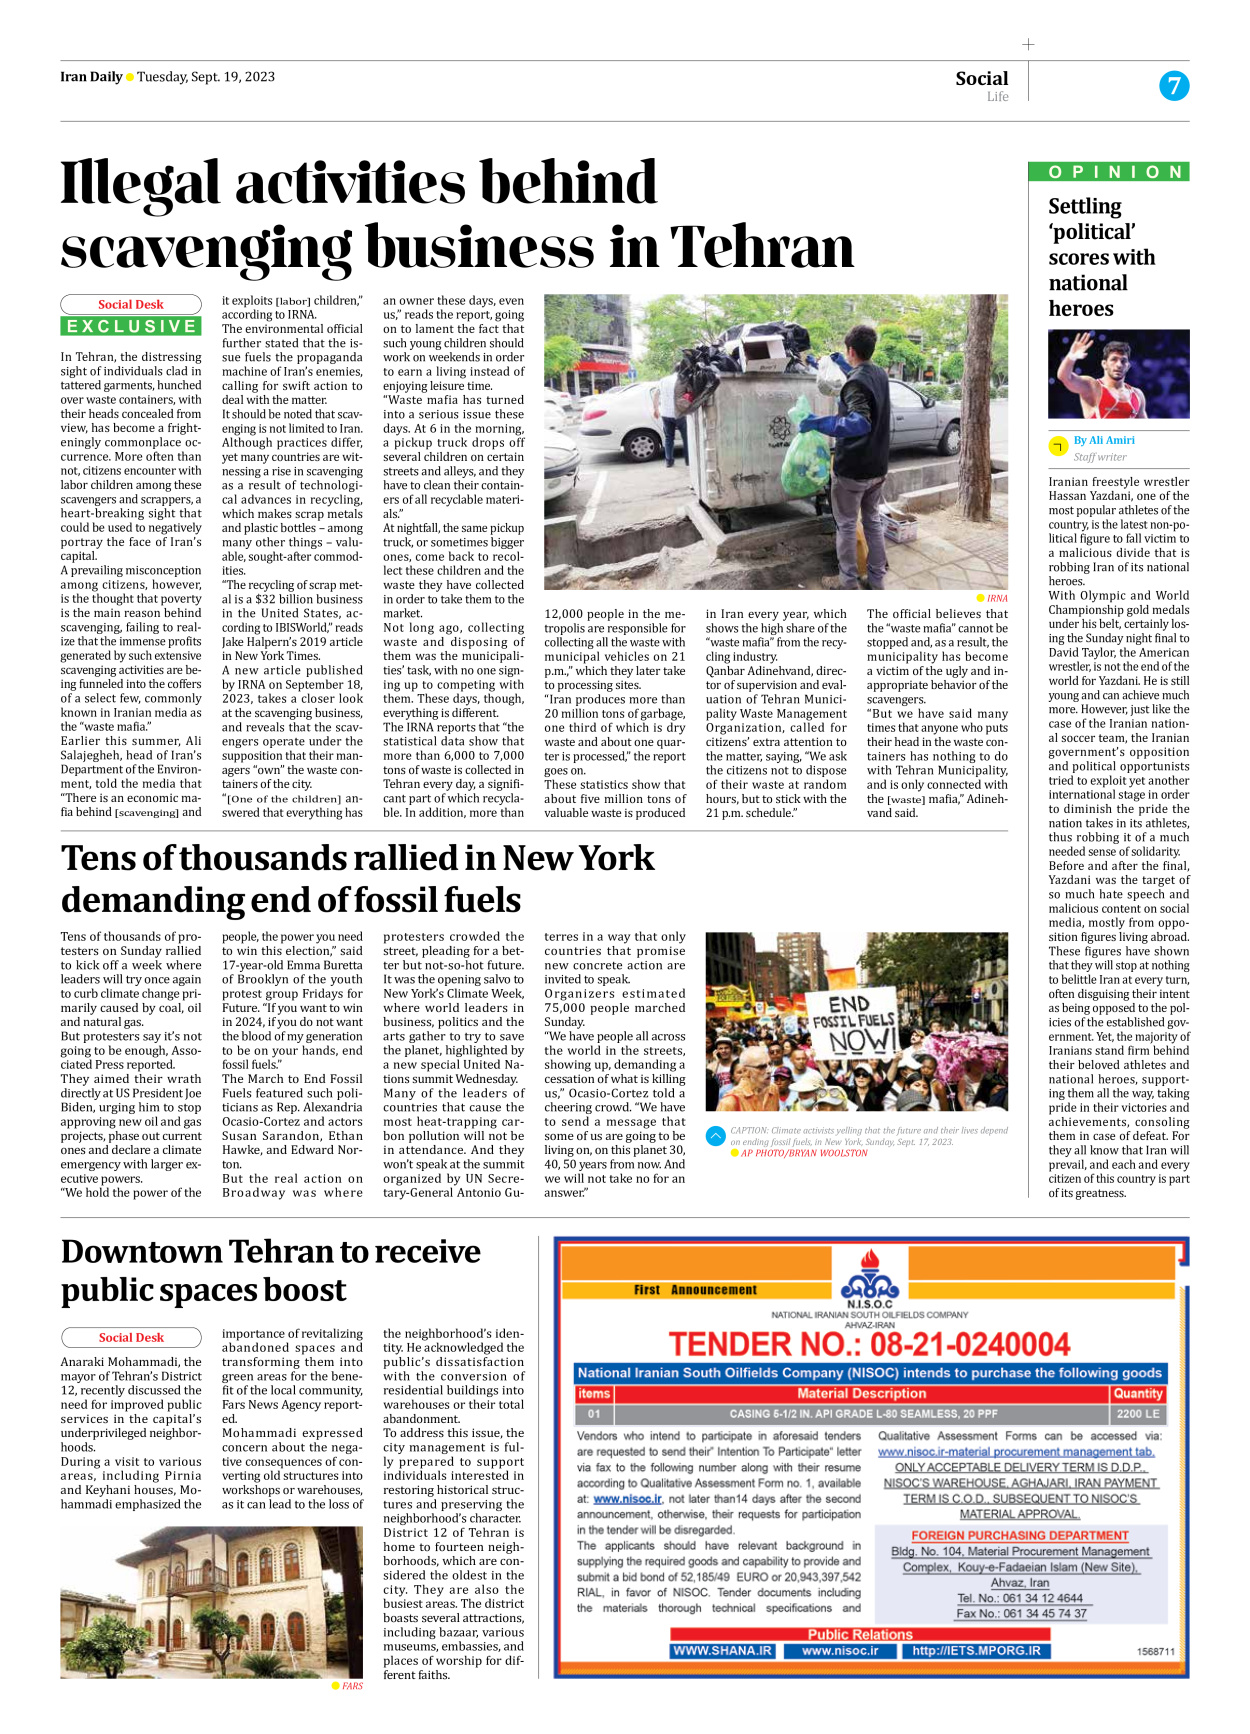 Iran Daily - Number Seven Thousand Three Hundred and Eighty Nine - 19 September 2023 - Page 7